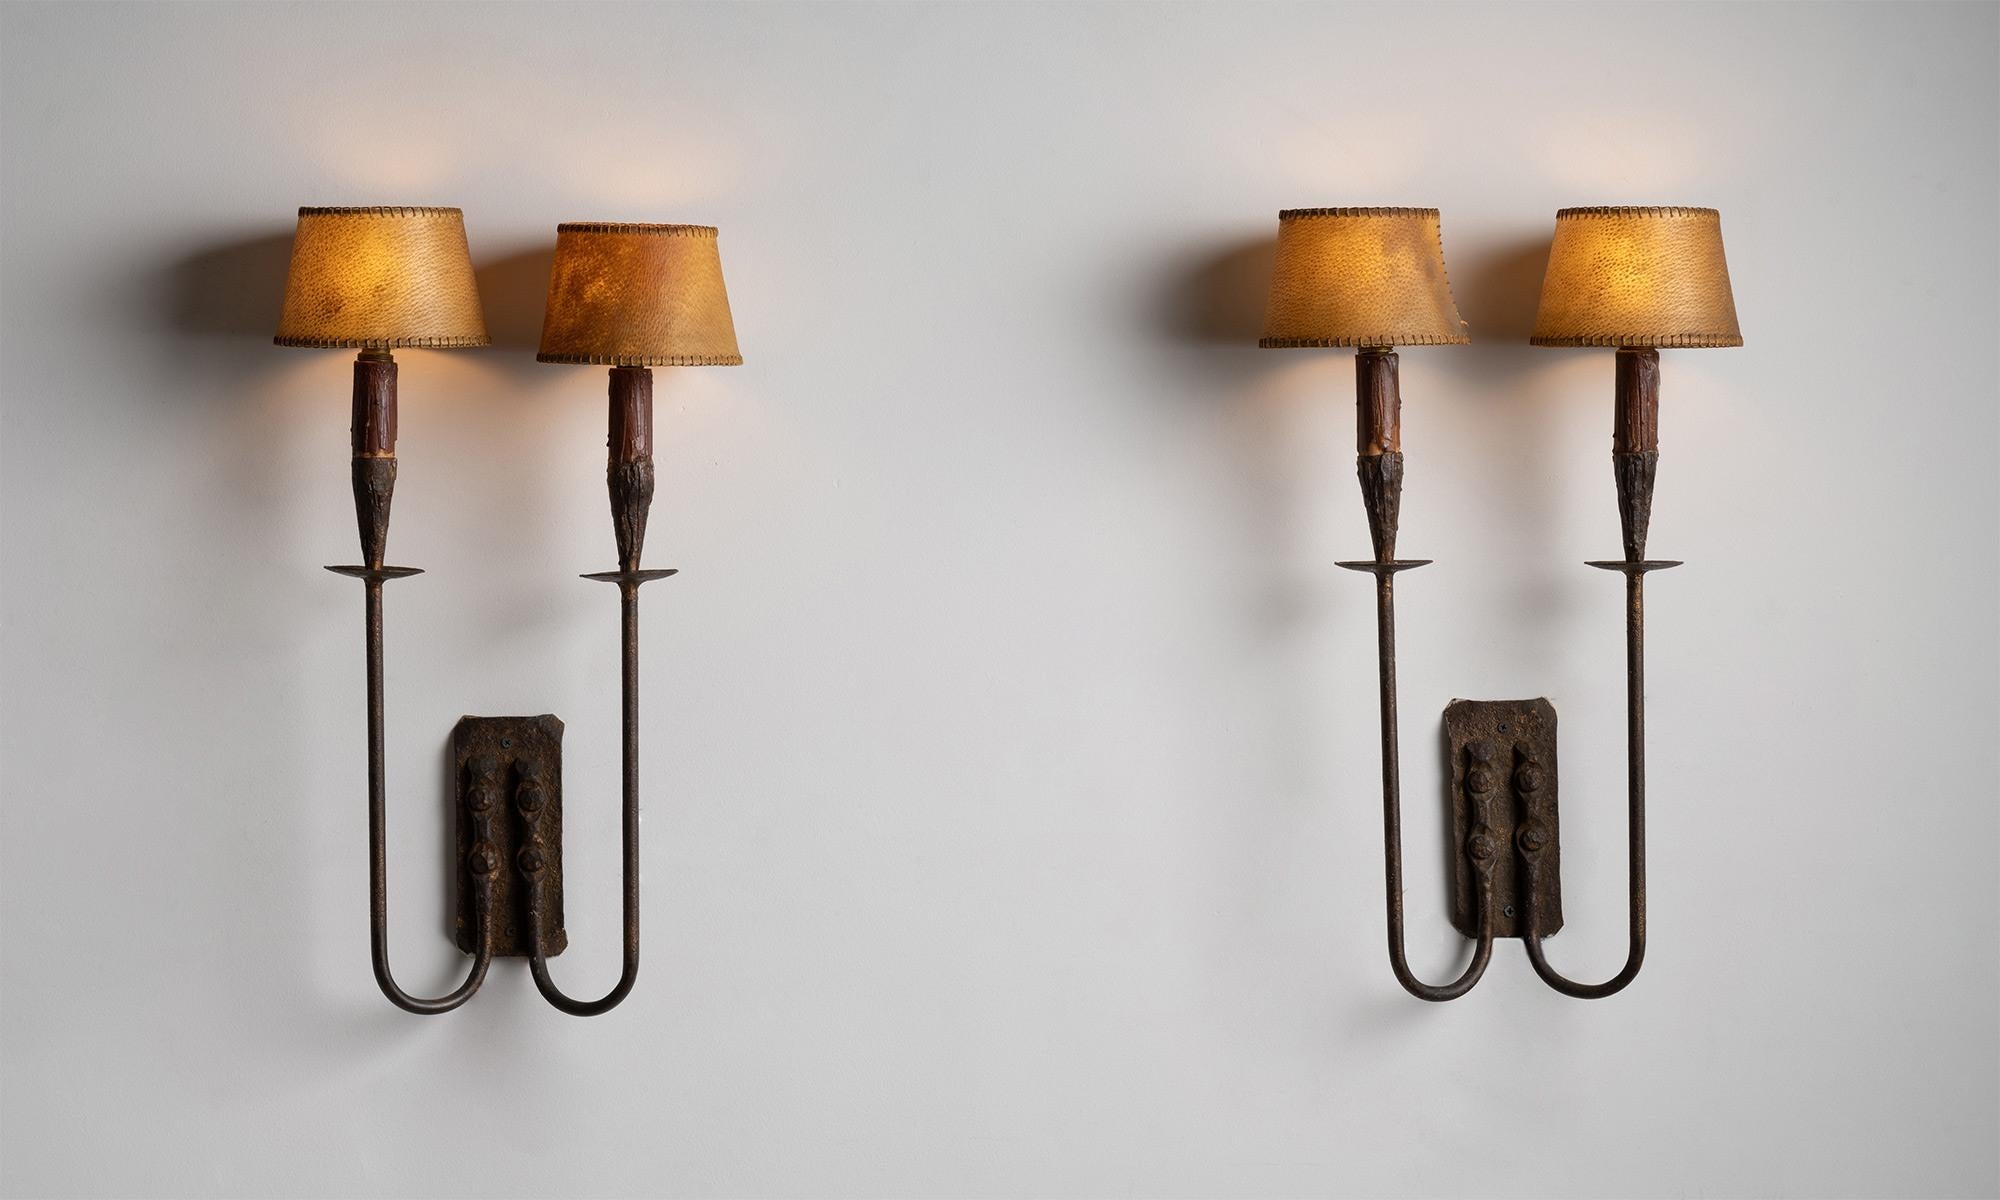 Wrought iron double sconces, Spain Circa 1950

Wrought iron candelabra with oxblood red candle wax and natural parchment shades.

Ref. L4409

*Please note that items are sold individually and are priced per item*